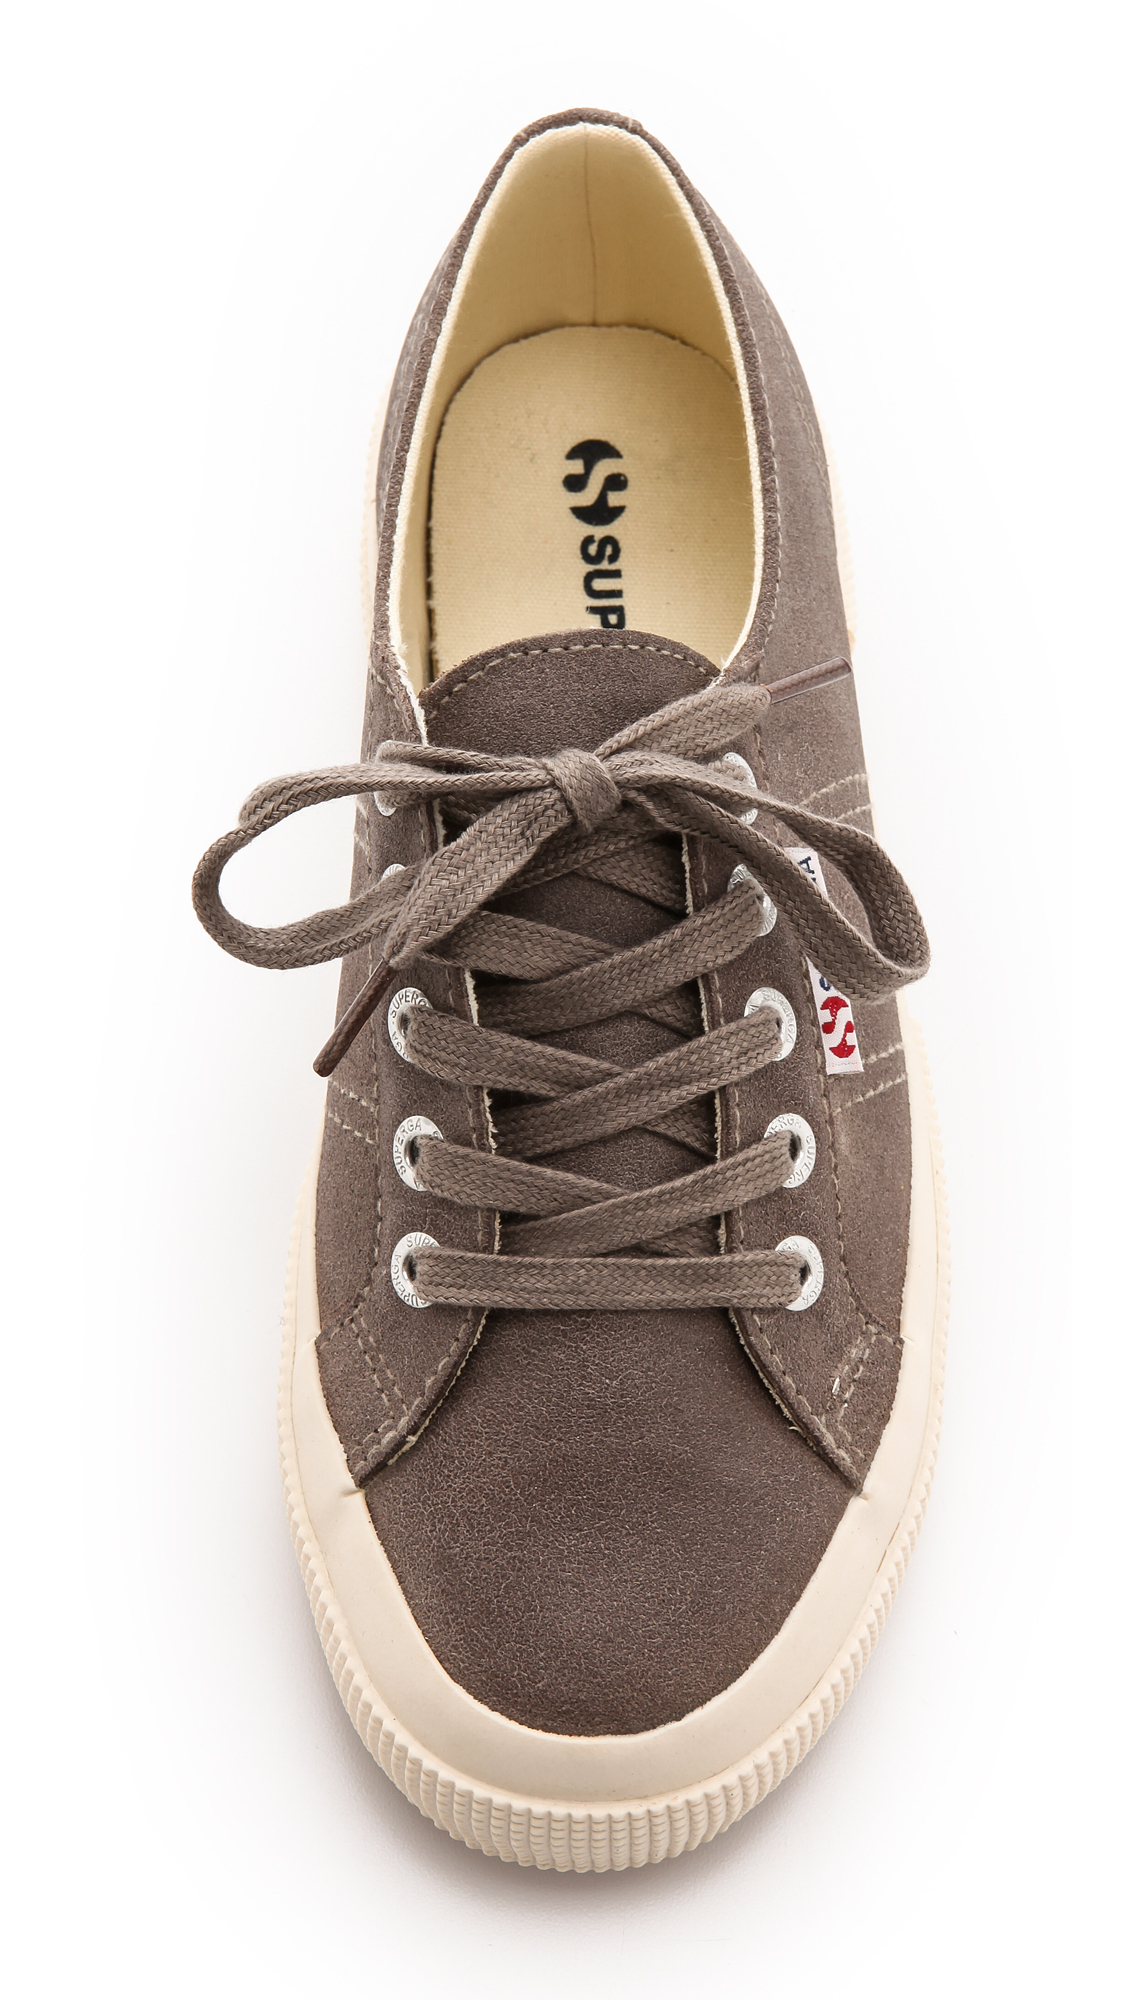 Lyst - Superga 2750 Waxed Suede Sneakers - Sand in Brown